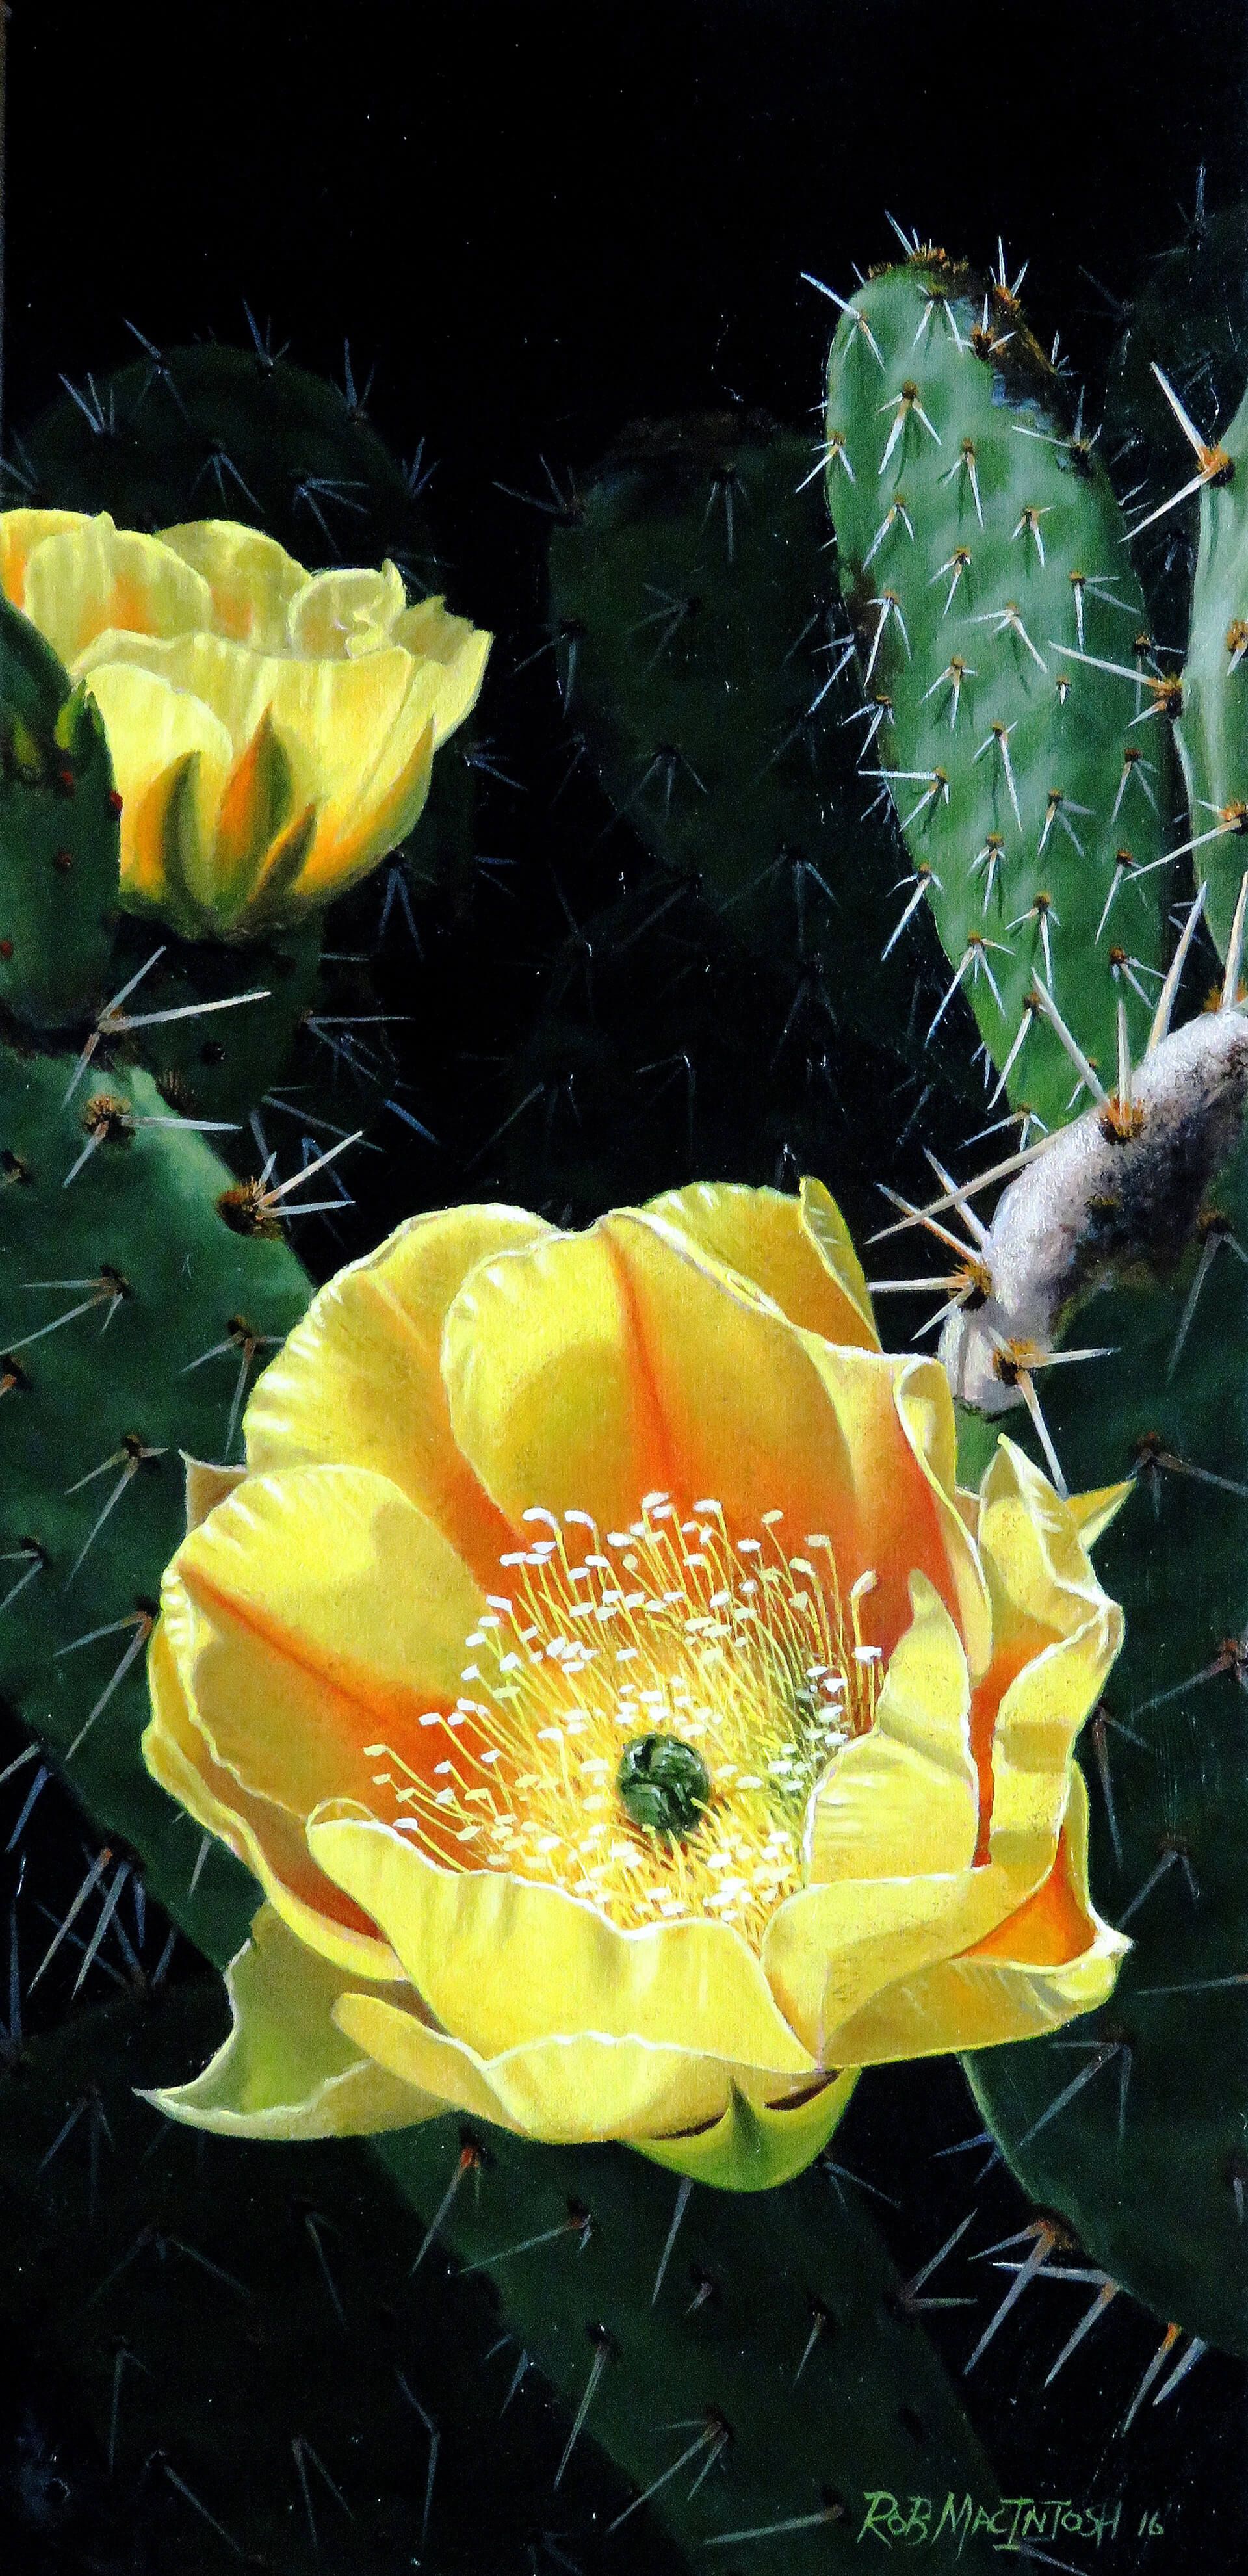 Photorealistic painting of a cactus bloom